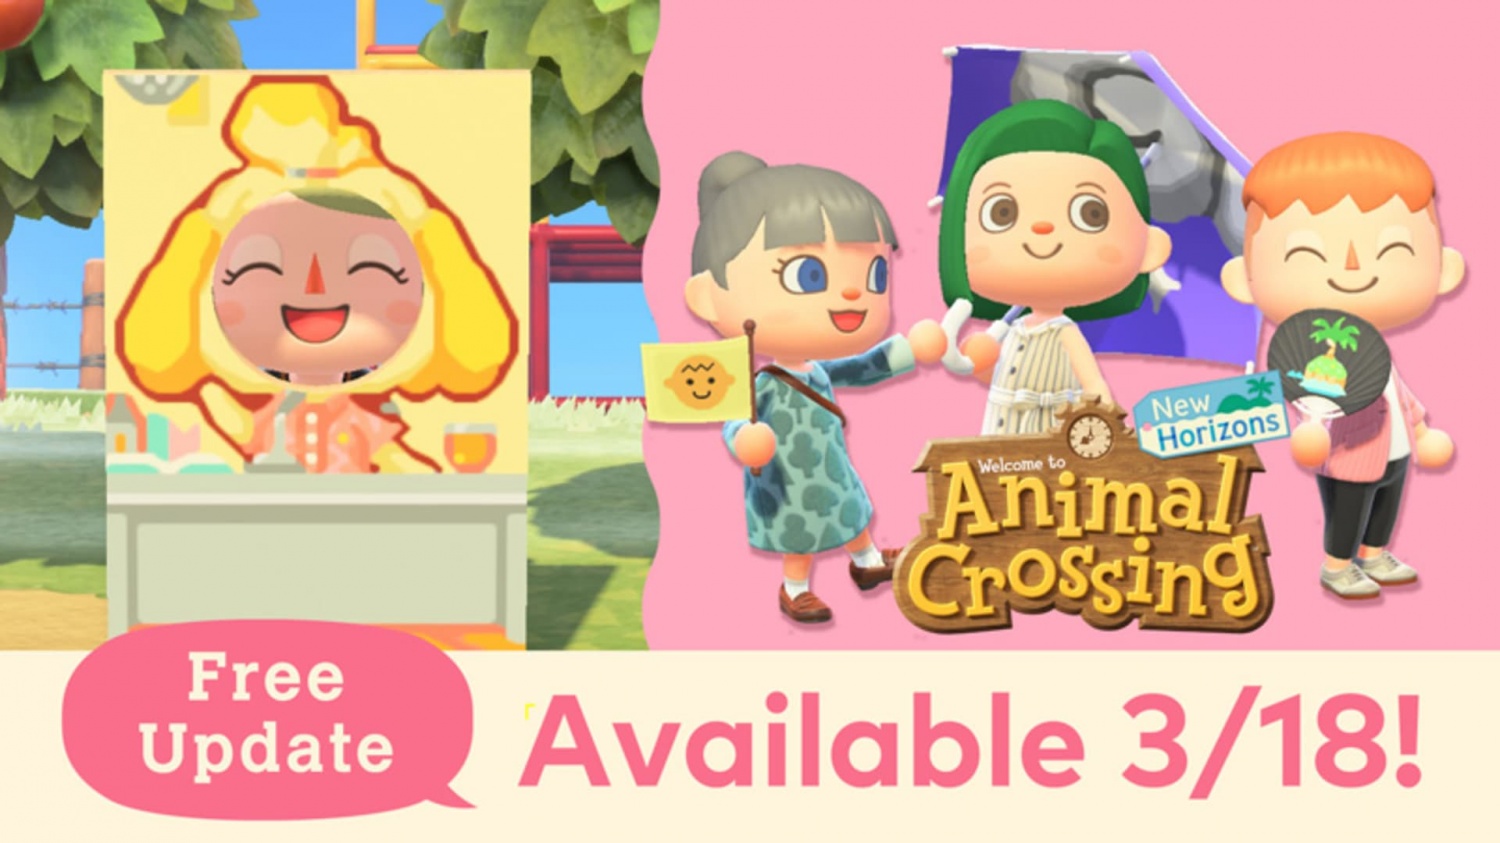 Animal Crossing: New Horizons launch sales surpass any Mario or